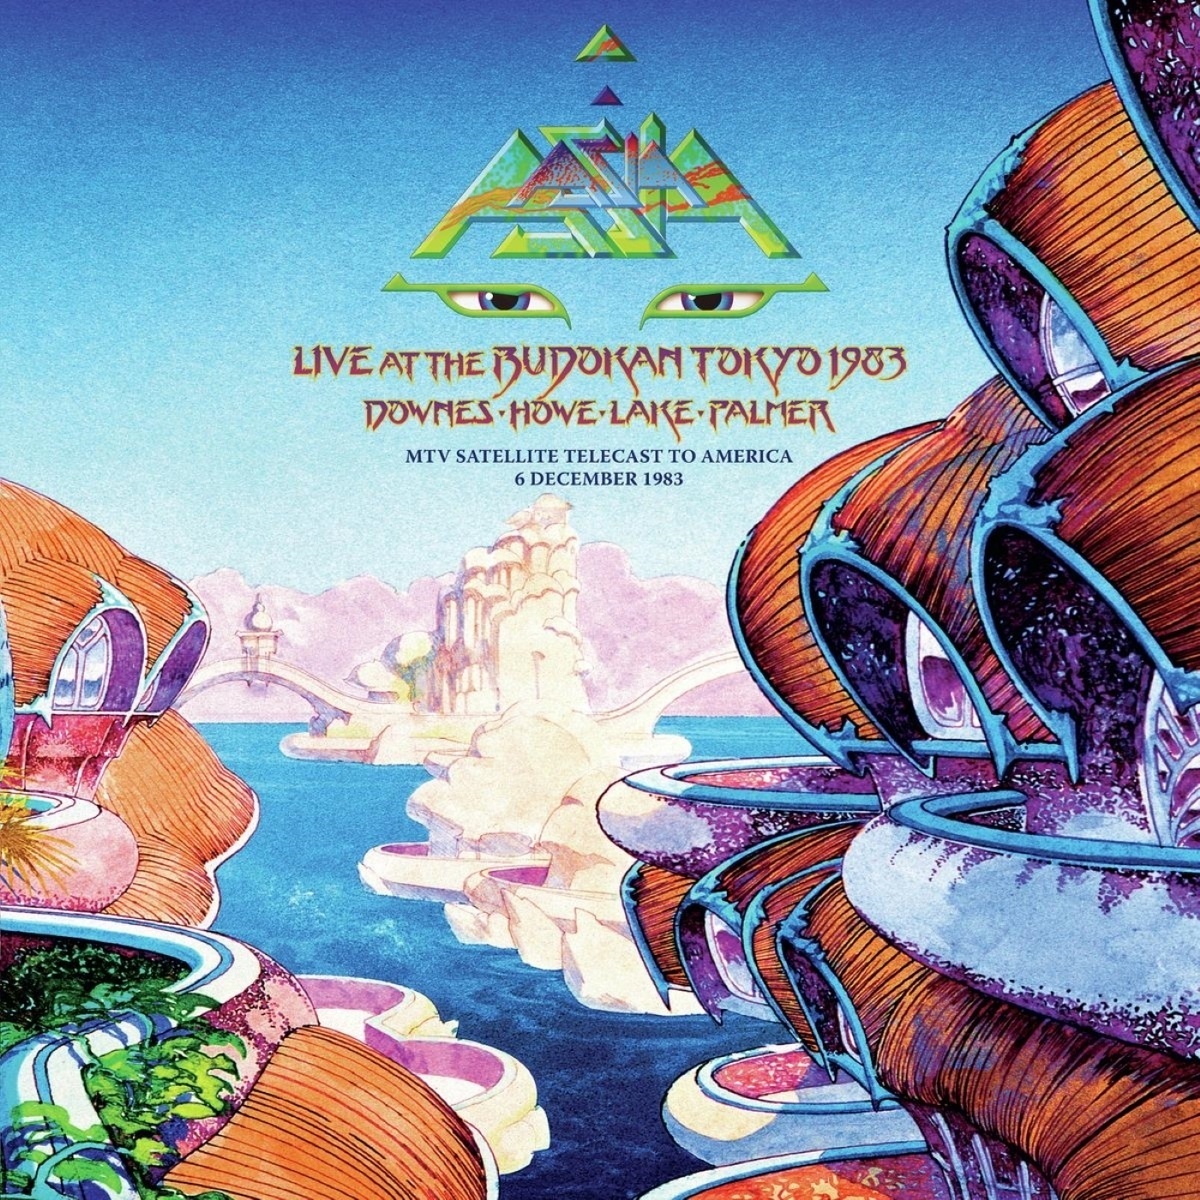 Asia In Asia - Live At The Budokan Tokyo 1983 - Asia. (CD)